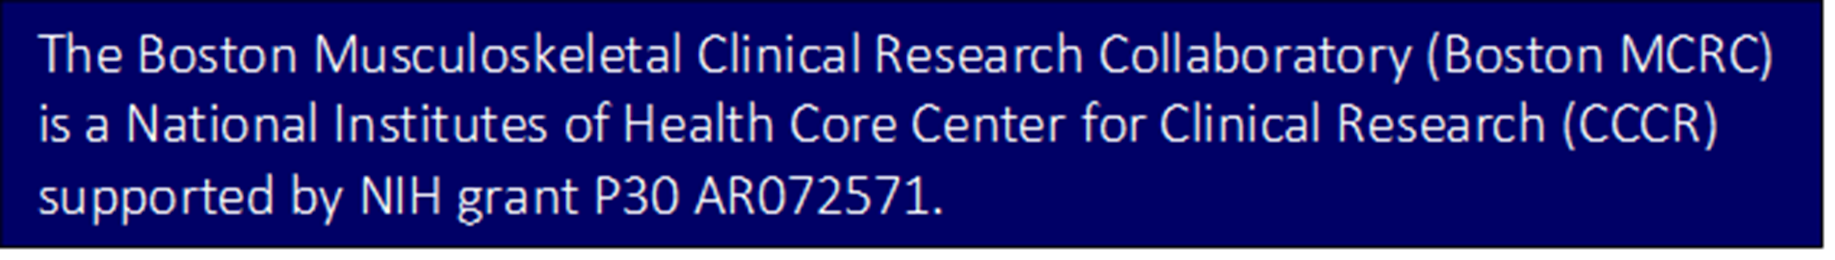 The Boston Musculoskeletal Clinical Research Collaboratory (Boston MCRC) is a National Institutes of Health Core Center for Clinical Research (CCCR) supported by NIH grant P30 AR072571.